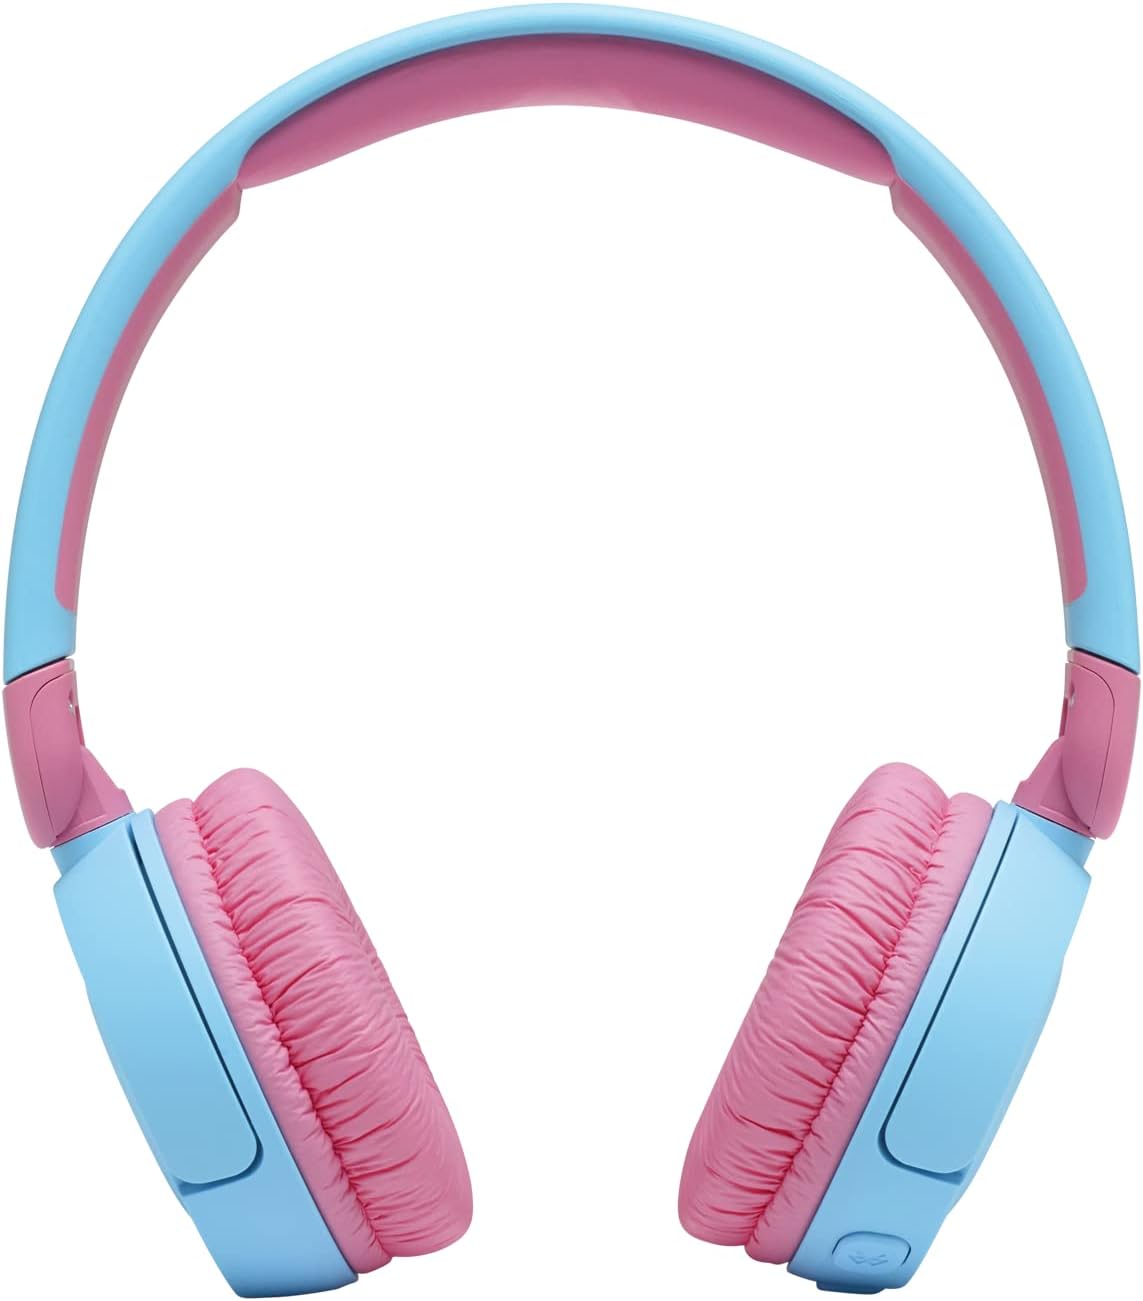 JBL JR310BT Ultra Portable Kids Wireless On-Ear Headphones with Safe Sound, Built-In Mic, 30 Hours Battery, Soft Padded Headband and Ear Cushion